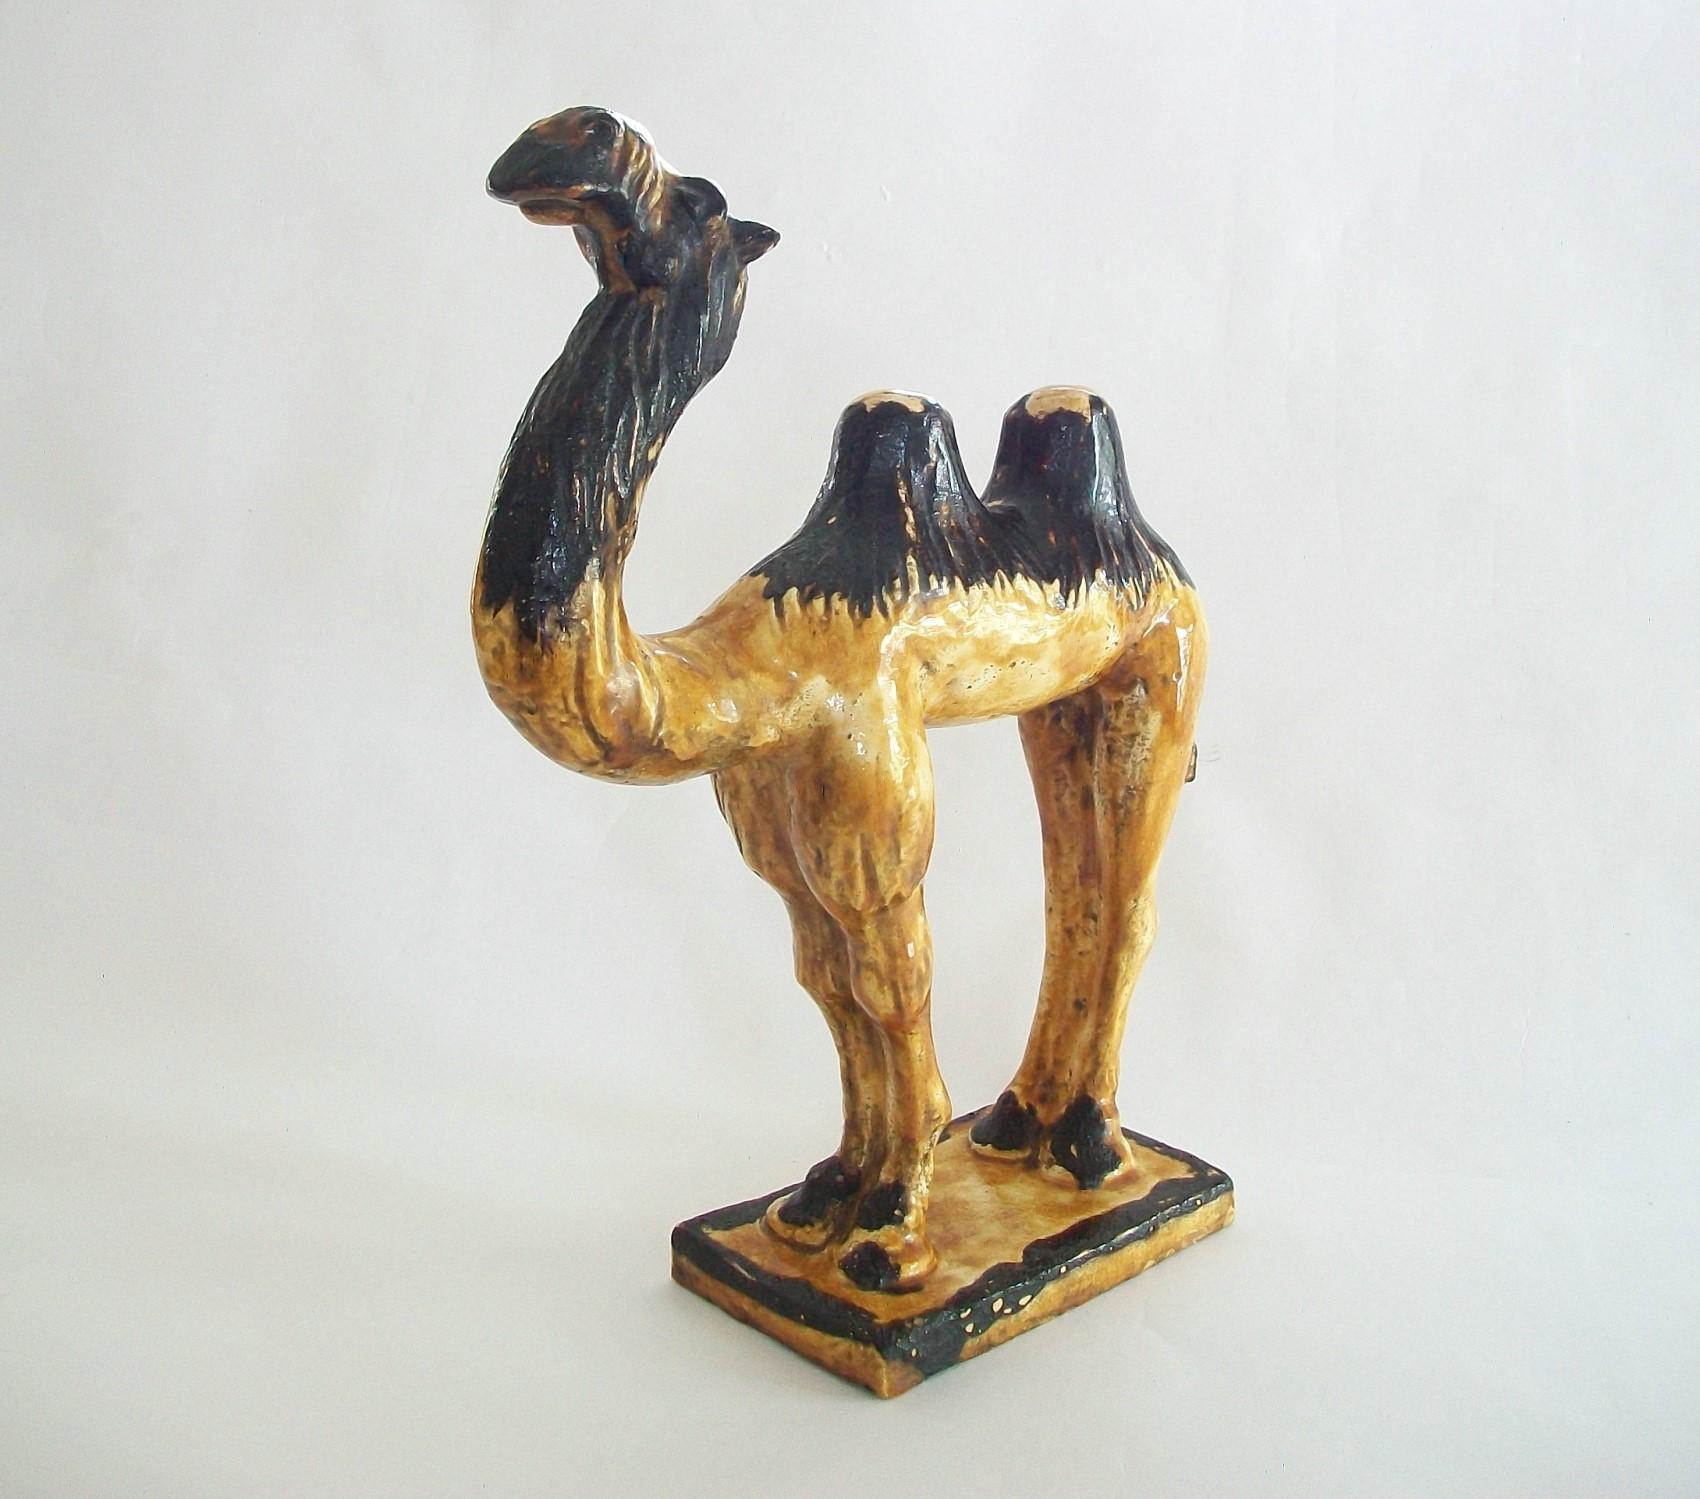 Antique Tang style Bactrian camel tomb figure - featuring an over-all amber glaze with brown highlights - stylized fur carved details to the head, legs and humps - unsigned - China - faded old collectors label fixed to the base with typewritten